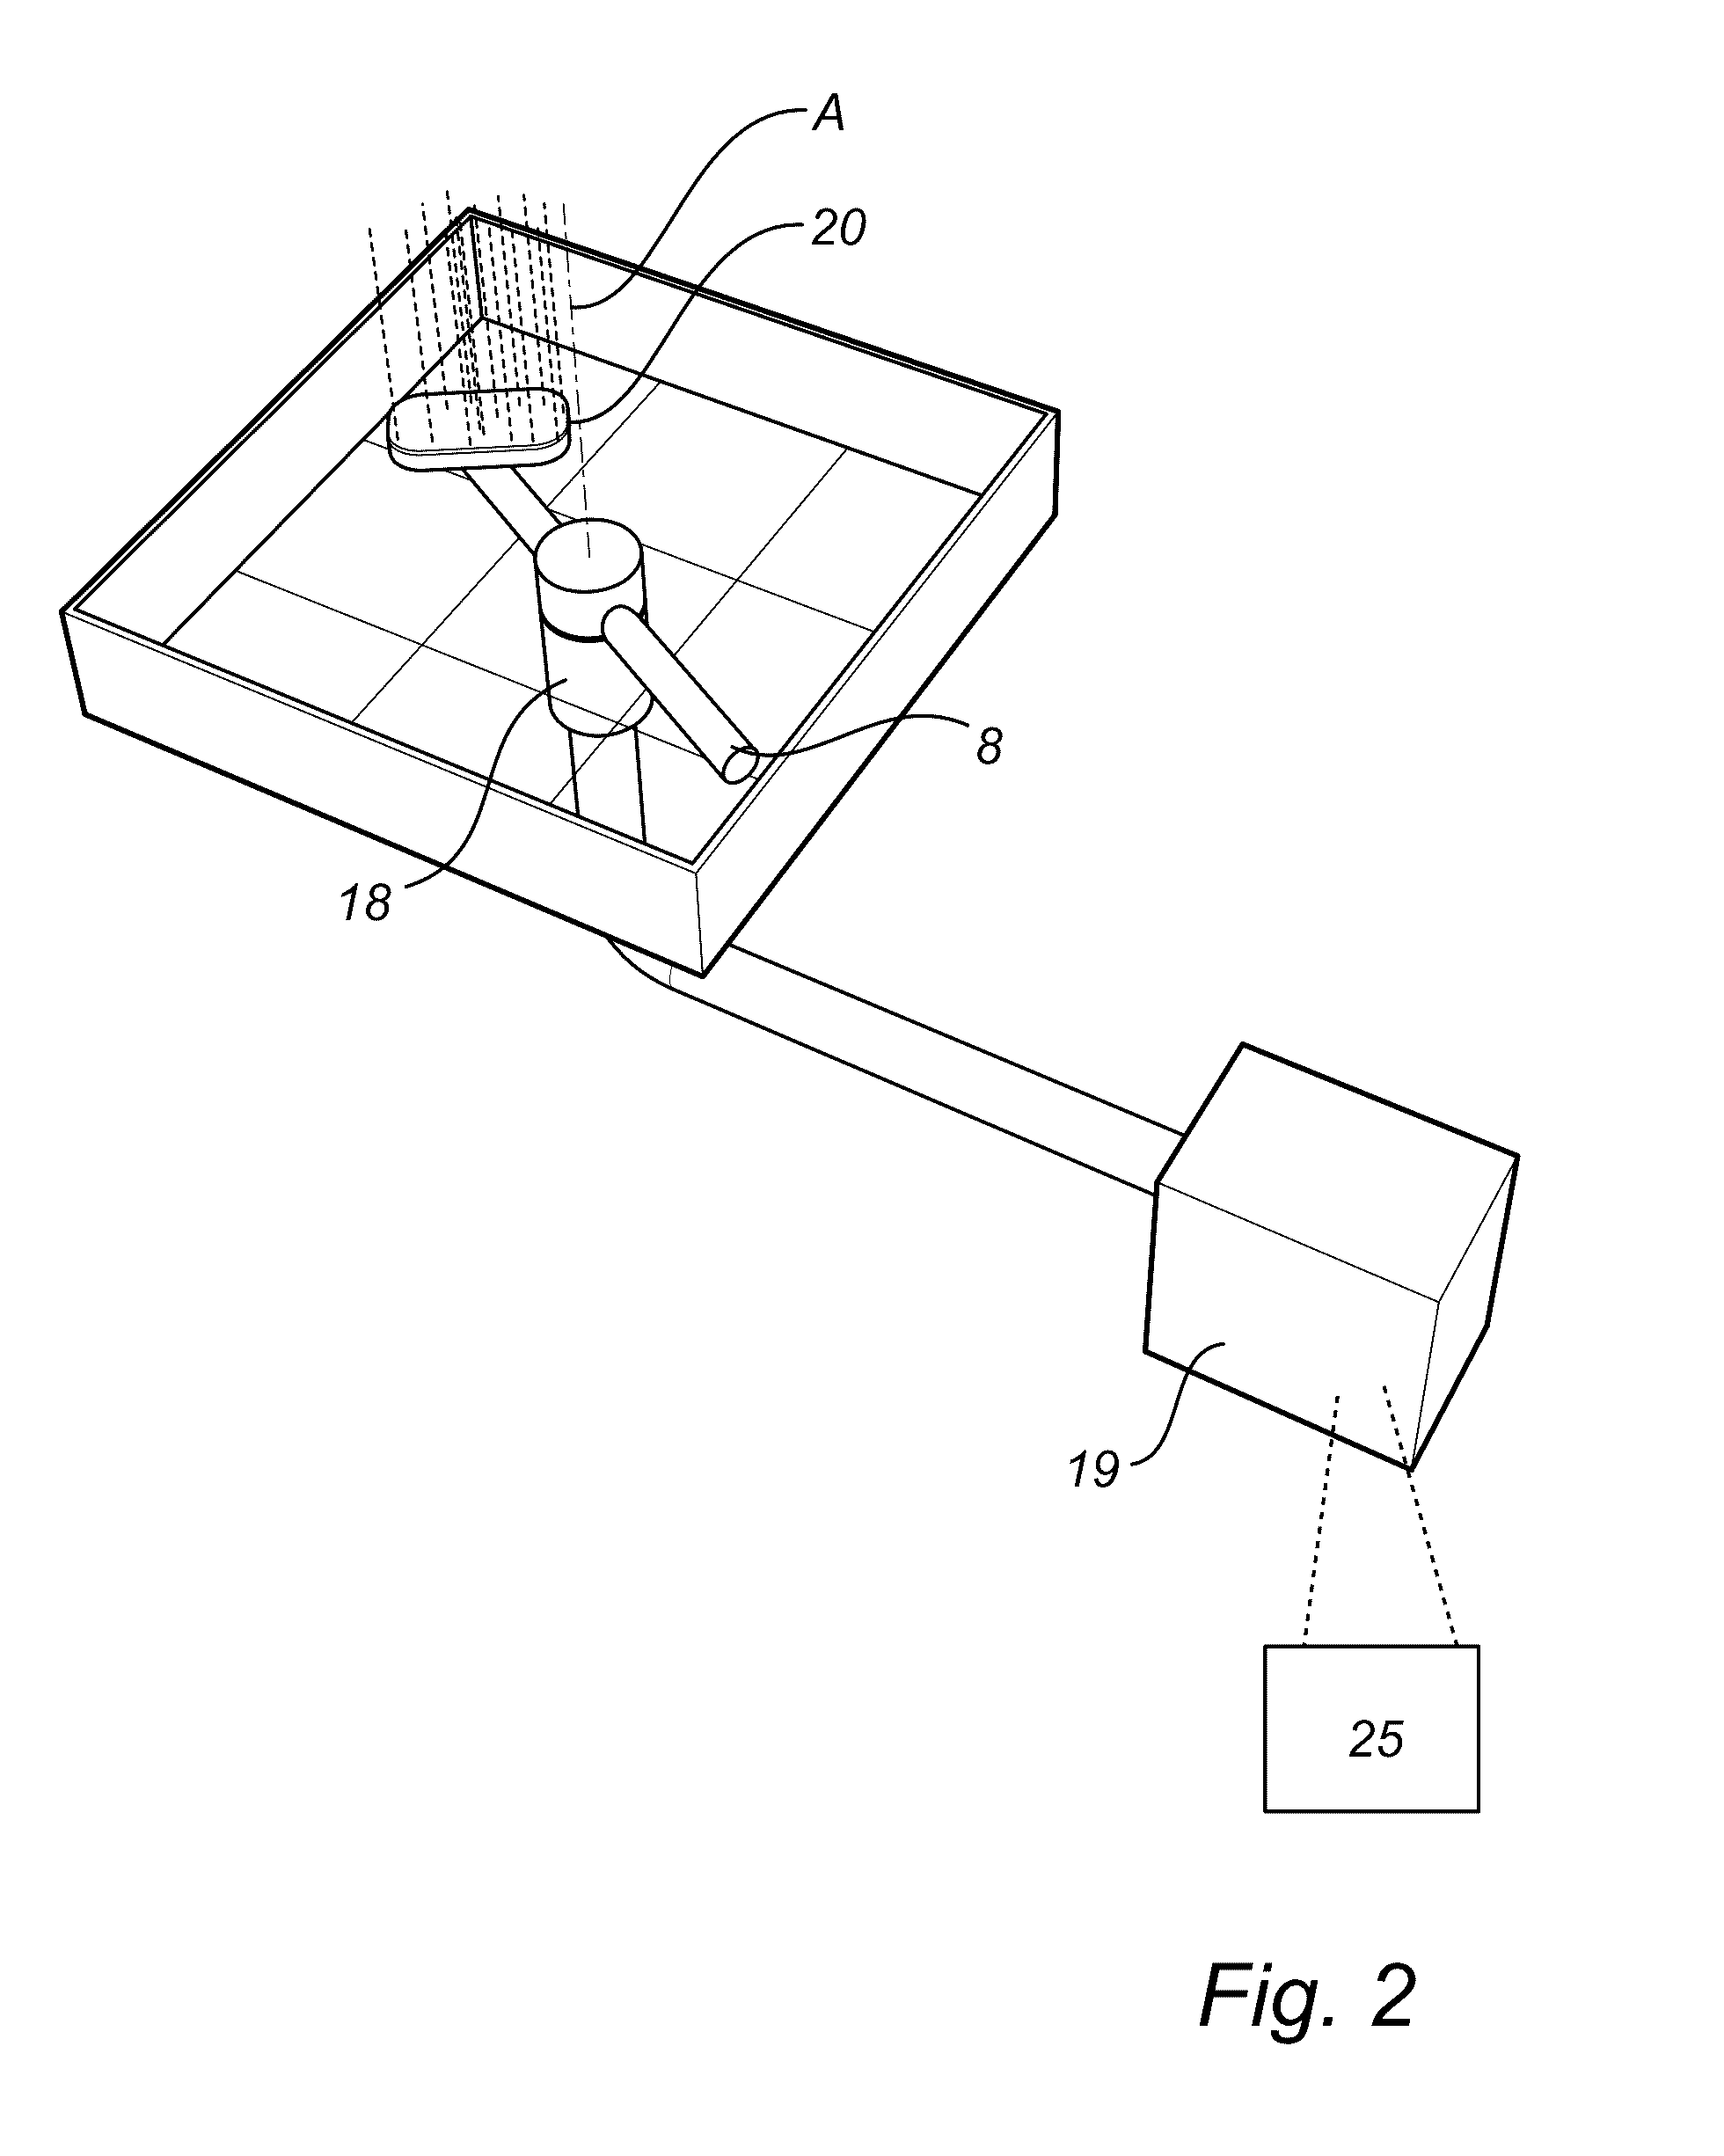 Arrangement in a dishwasher for creating a wash zone with intensified washing